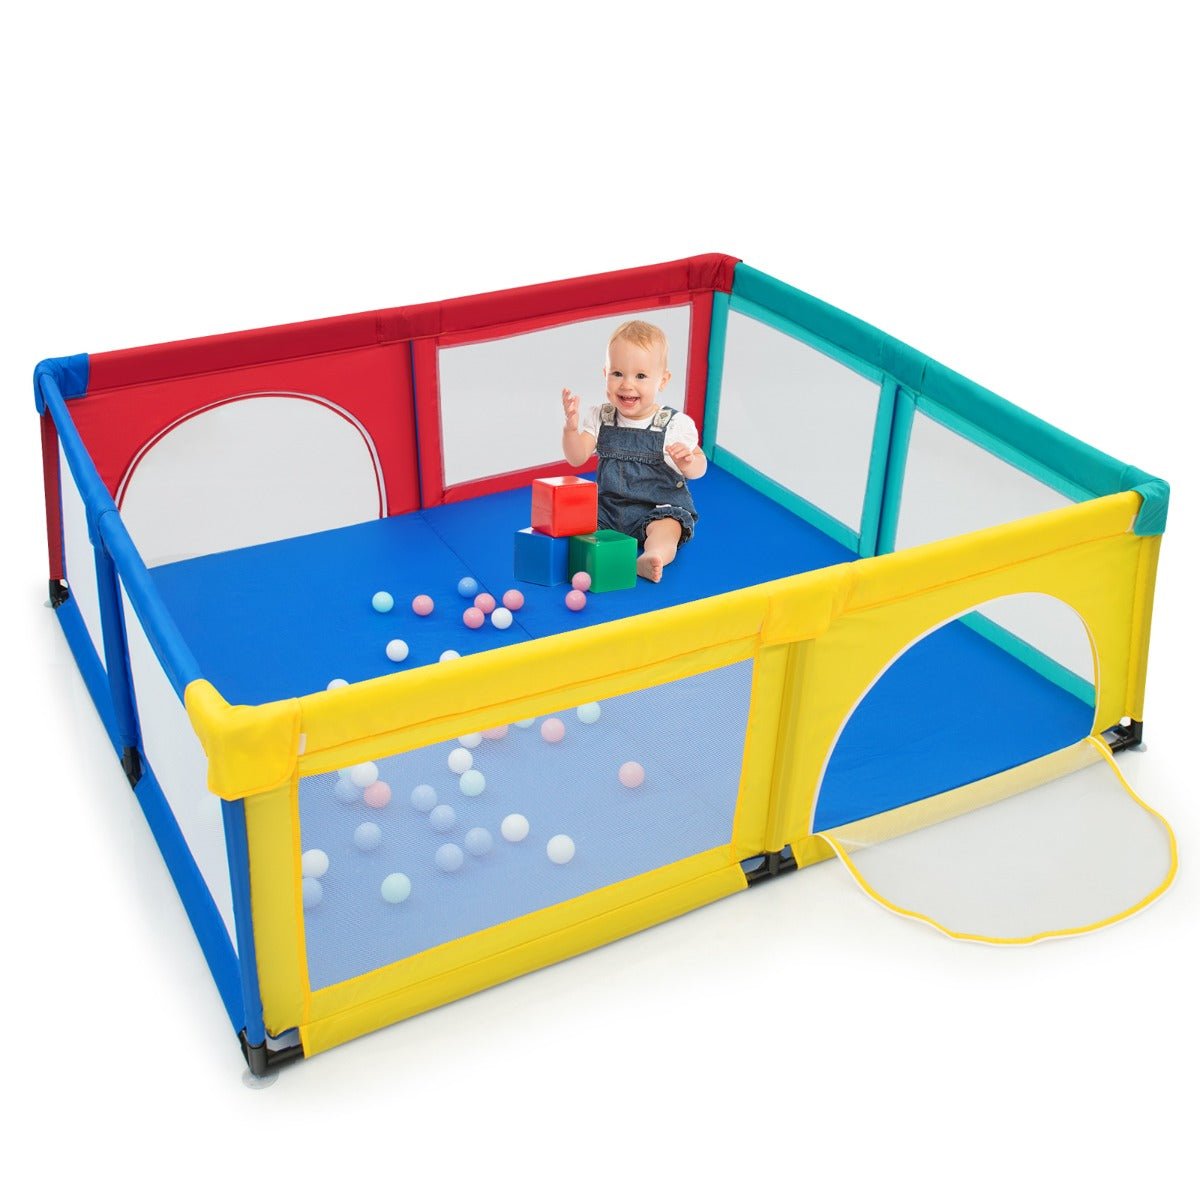 Multicolour Extra Large Baby Playpen: Mesh Walls & Safety Gates Included